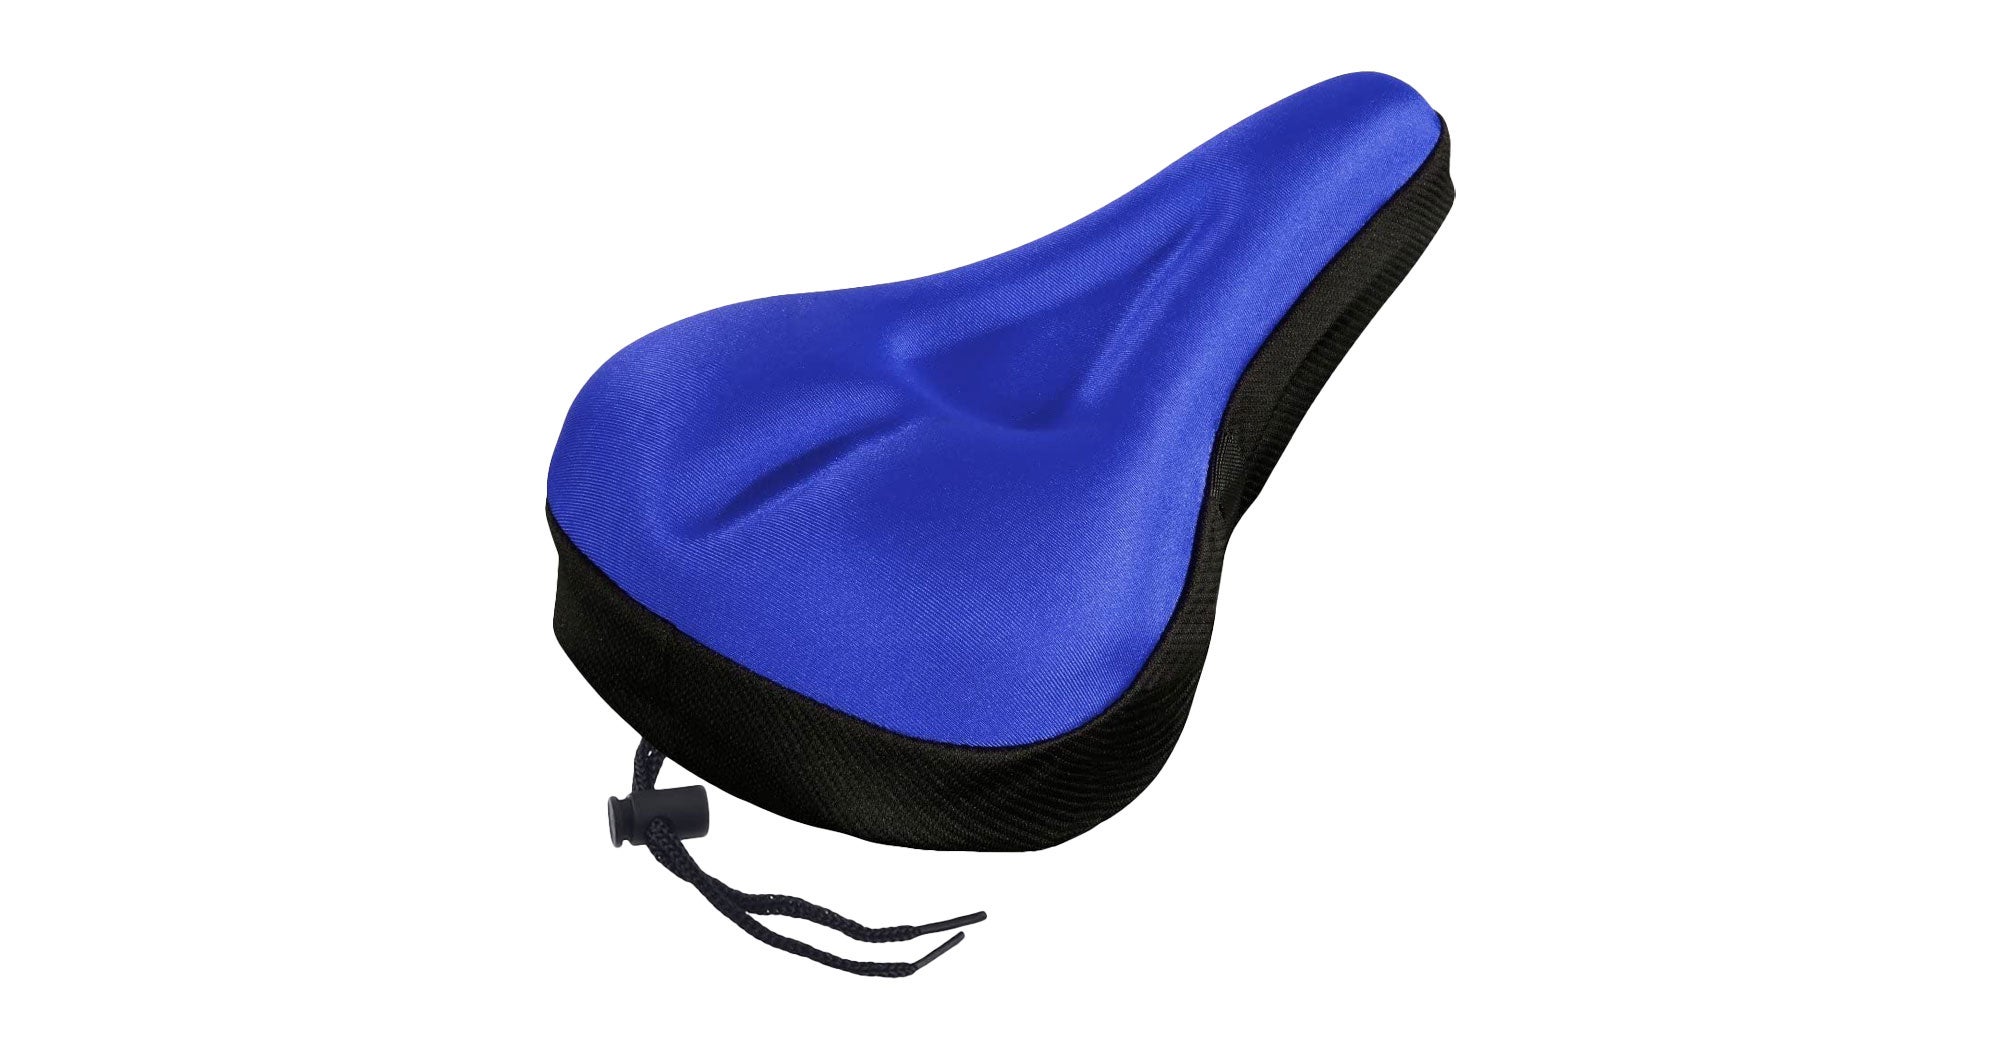 Dropship Bike Seat Cover Anti-Slip Comfortable Bicycle Padded Saddle Cover  Wear Resistant Soft Gel Cushion to Sell Online at a Lower Price